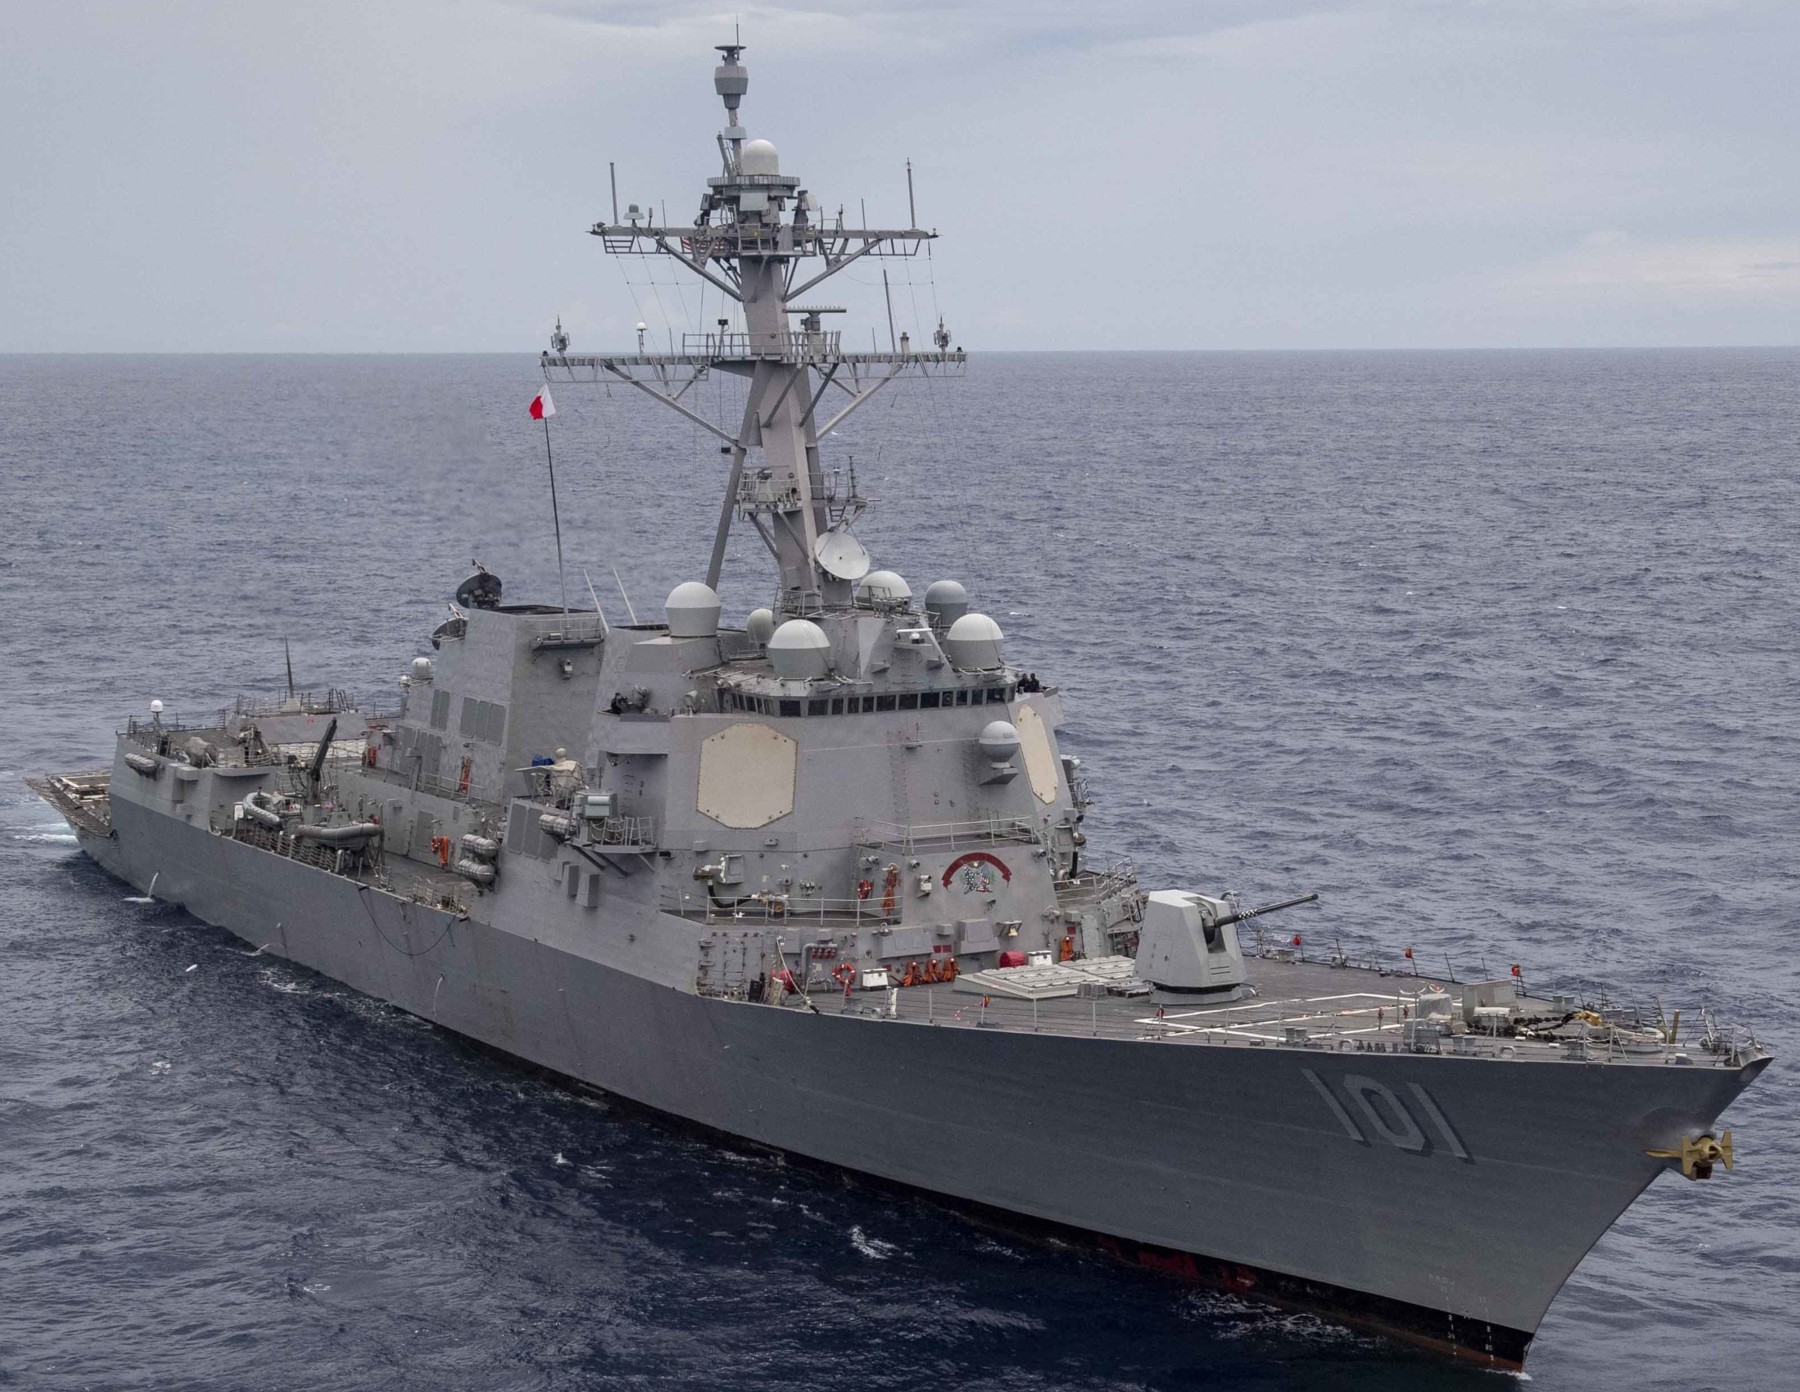 ddg-101 uss gridley arleigh burke class guided missile destroyer aegis us navy 60